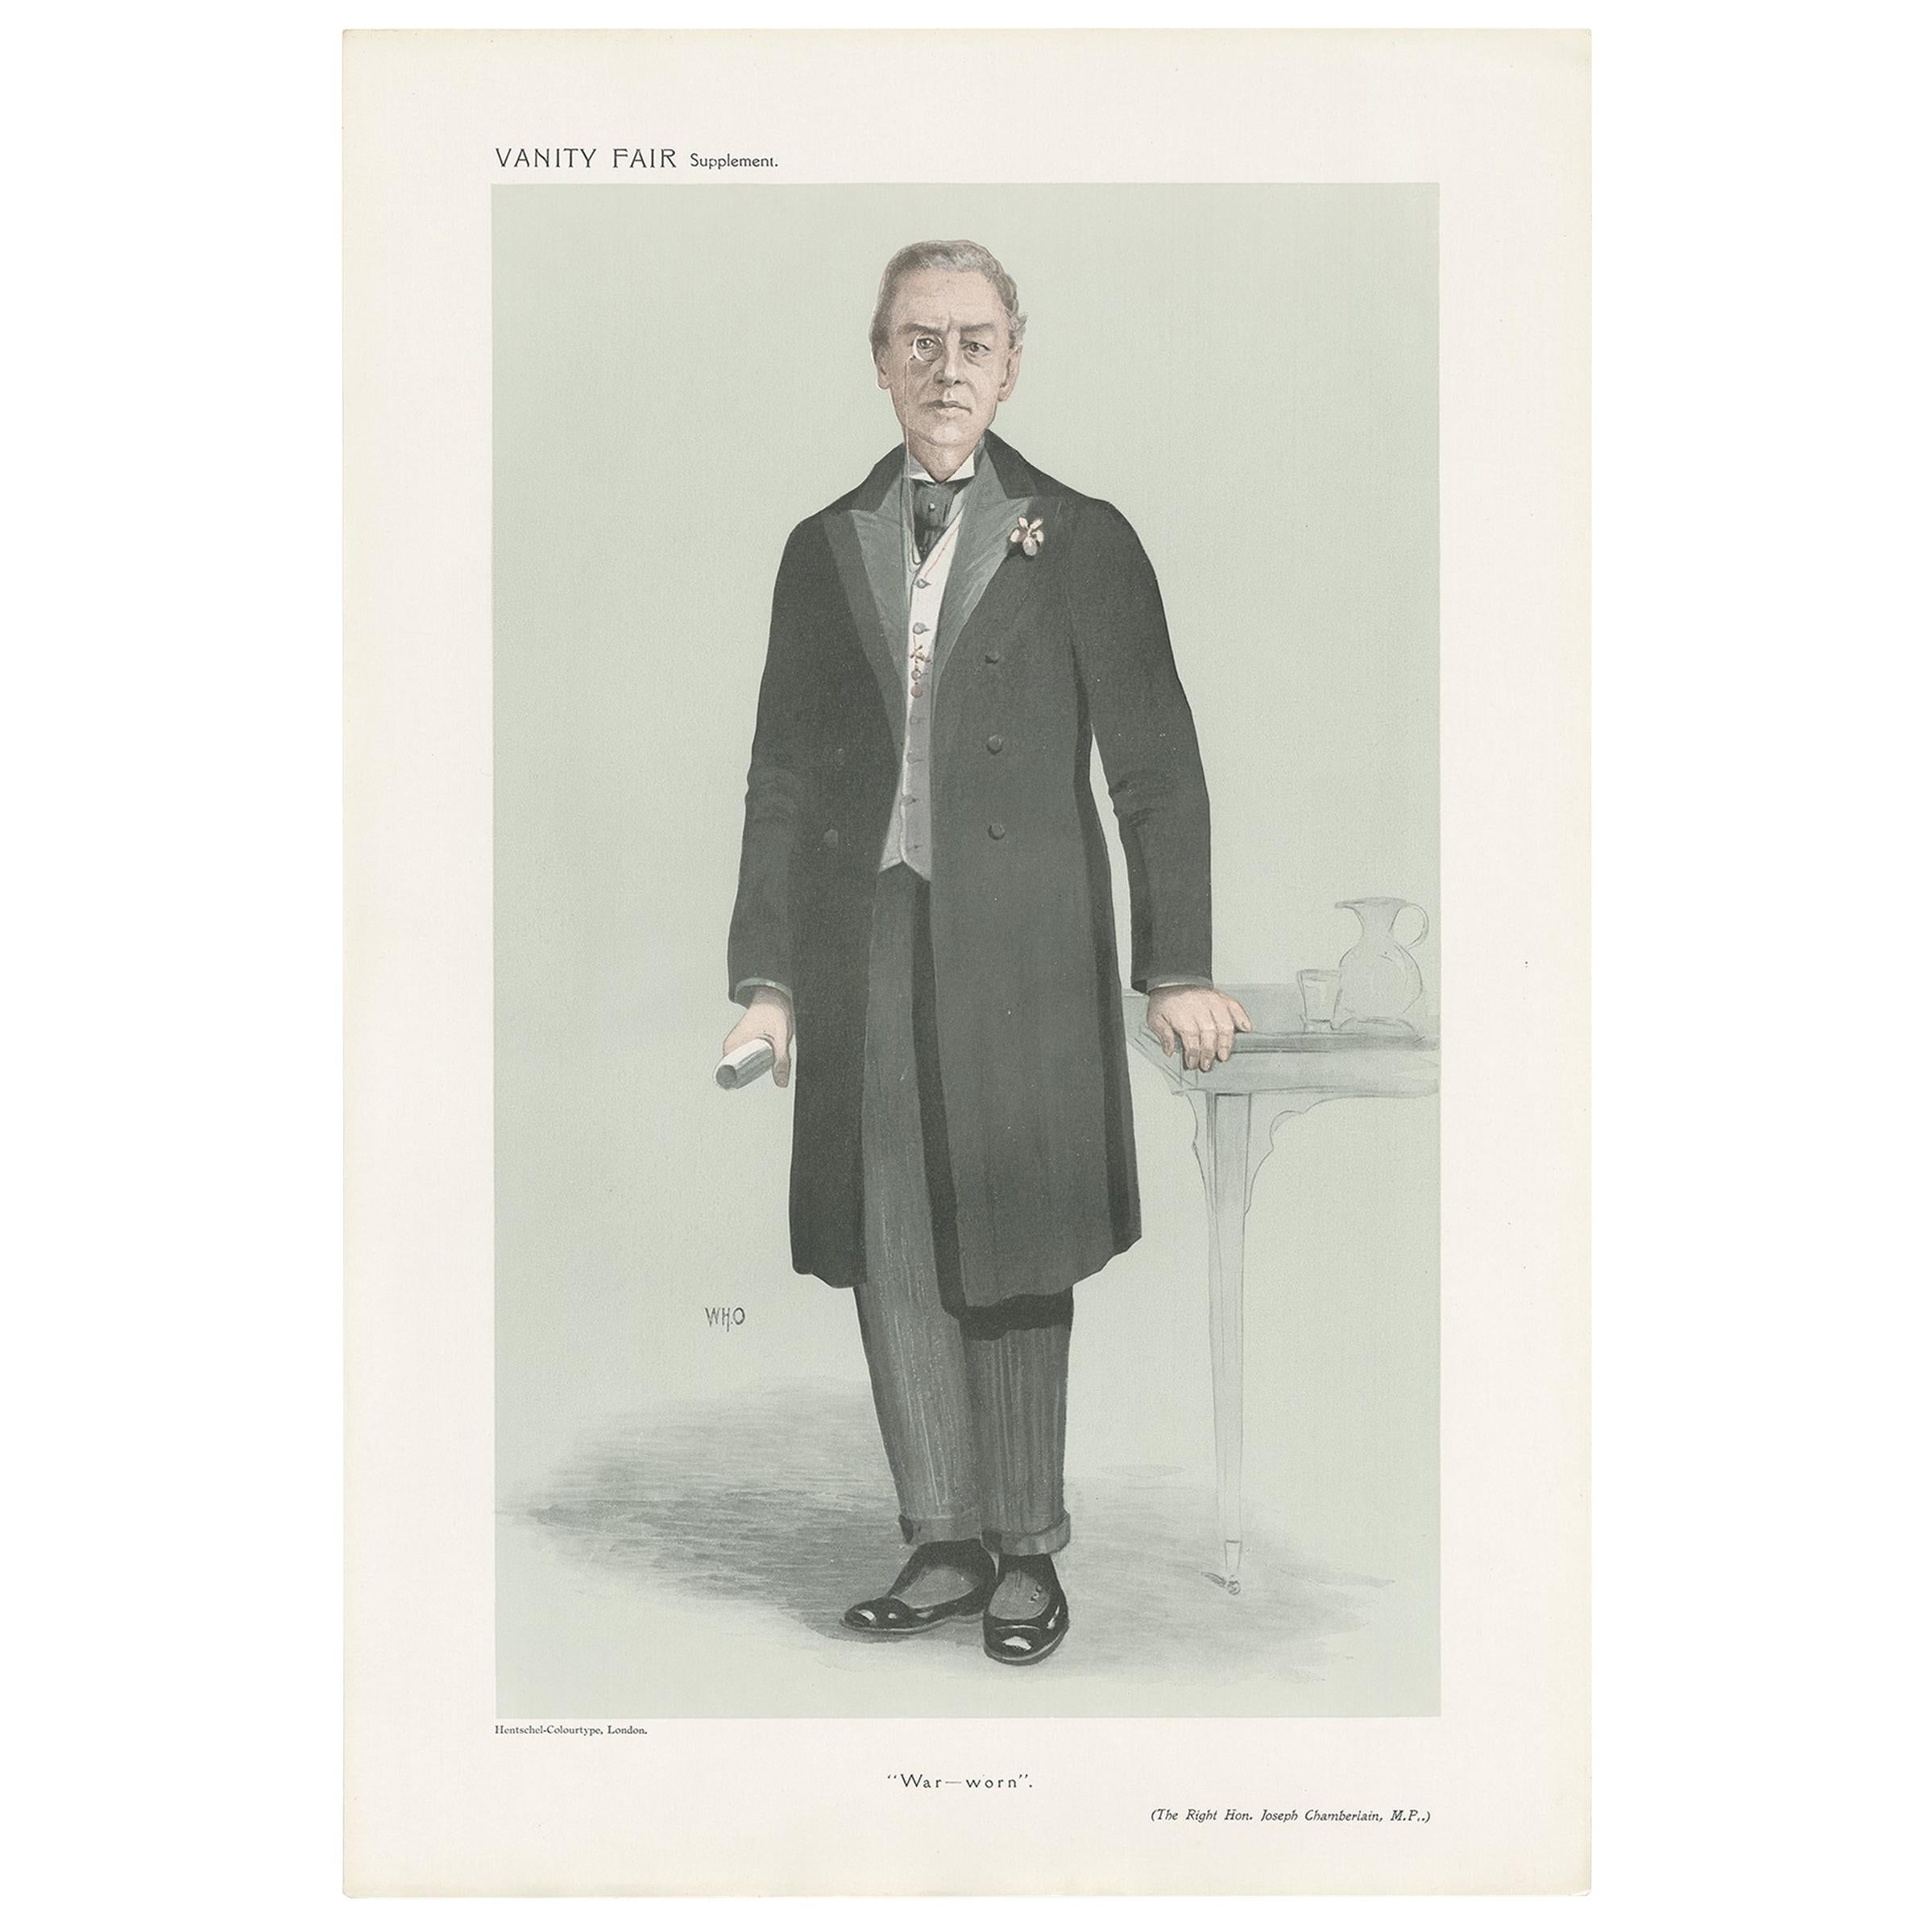 Antique Print of Joseph Chamberlain Published in the Vanity Fair, 1908